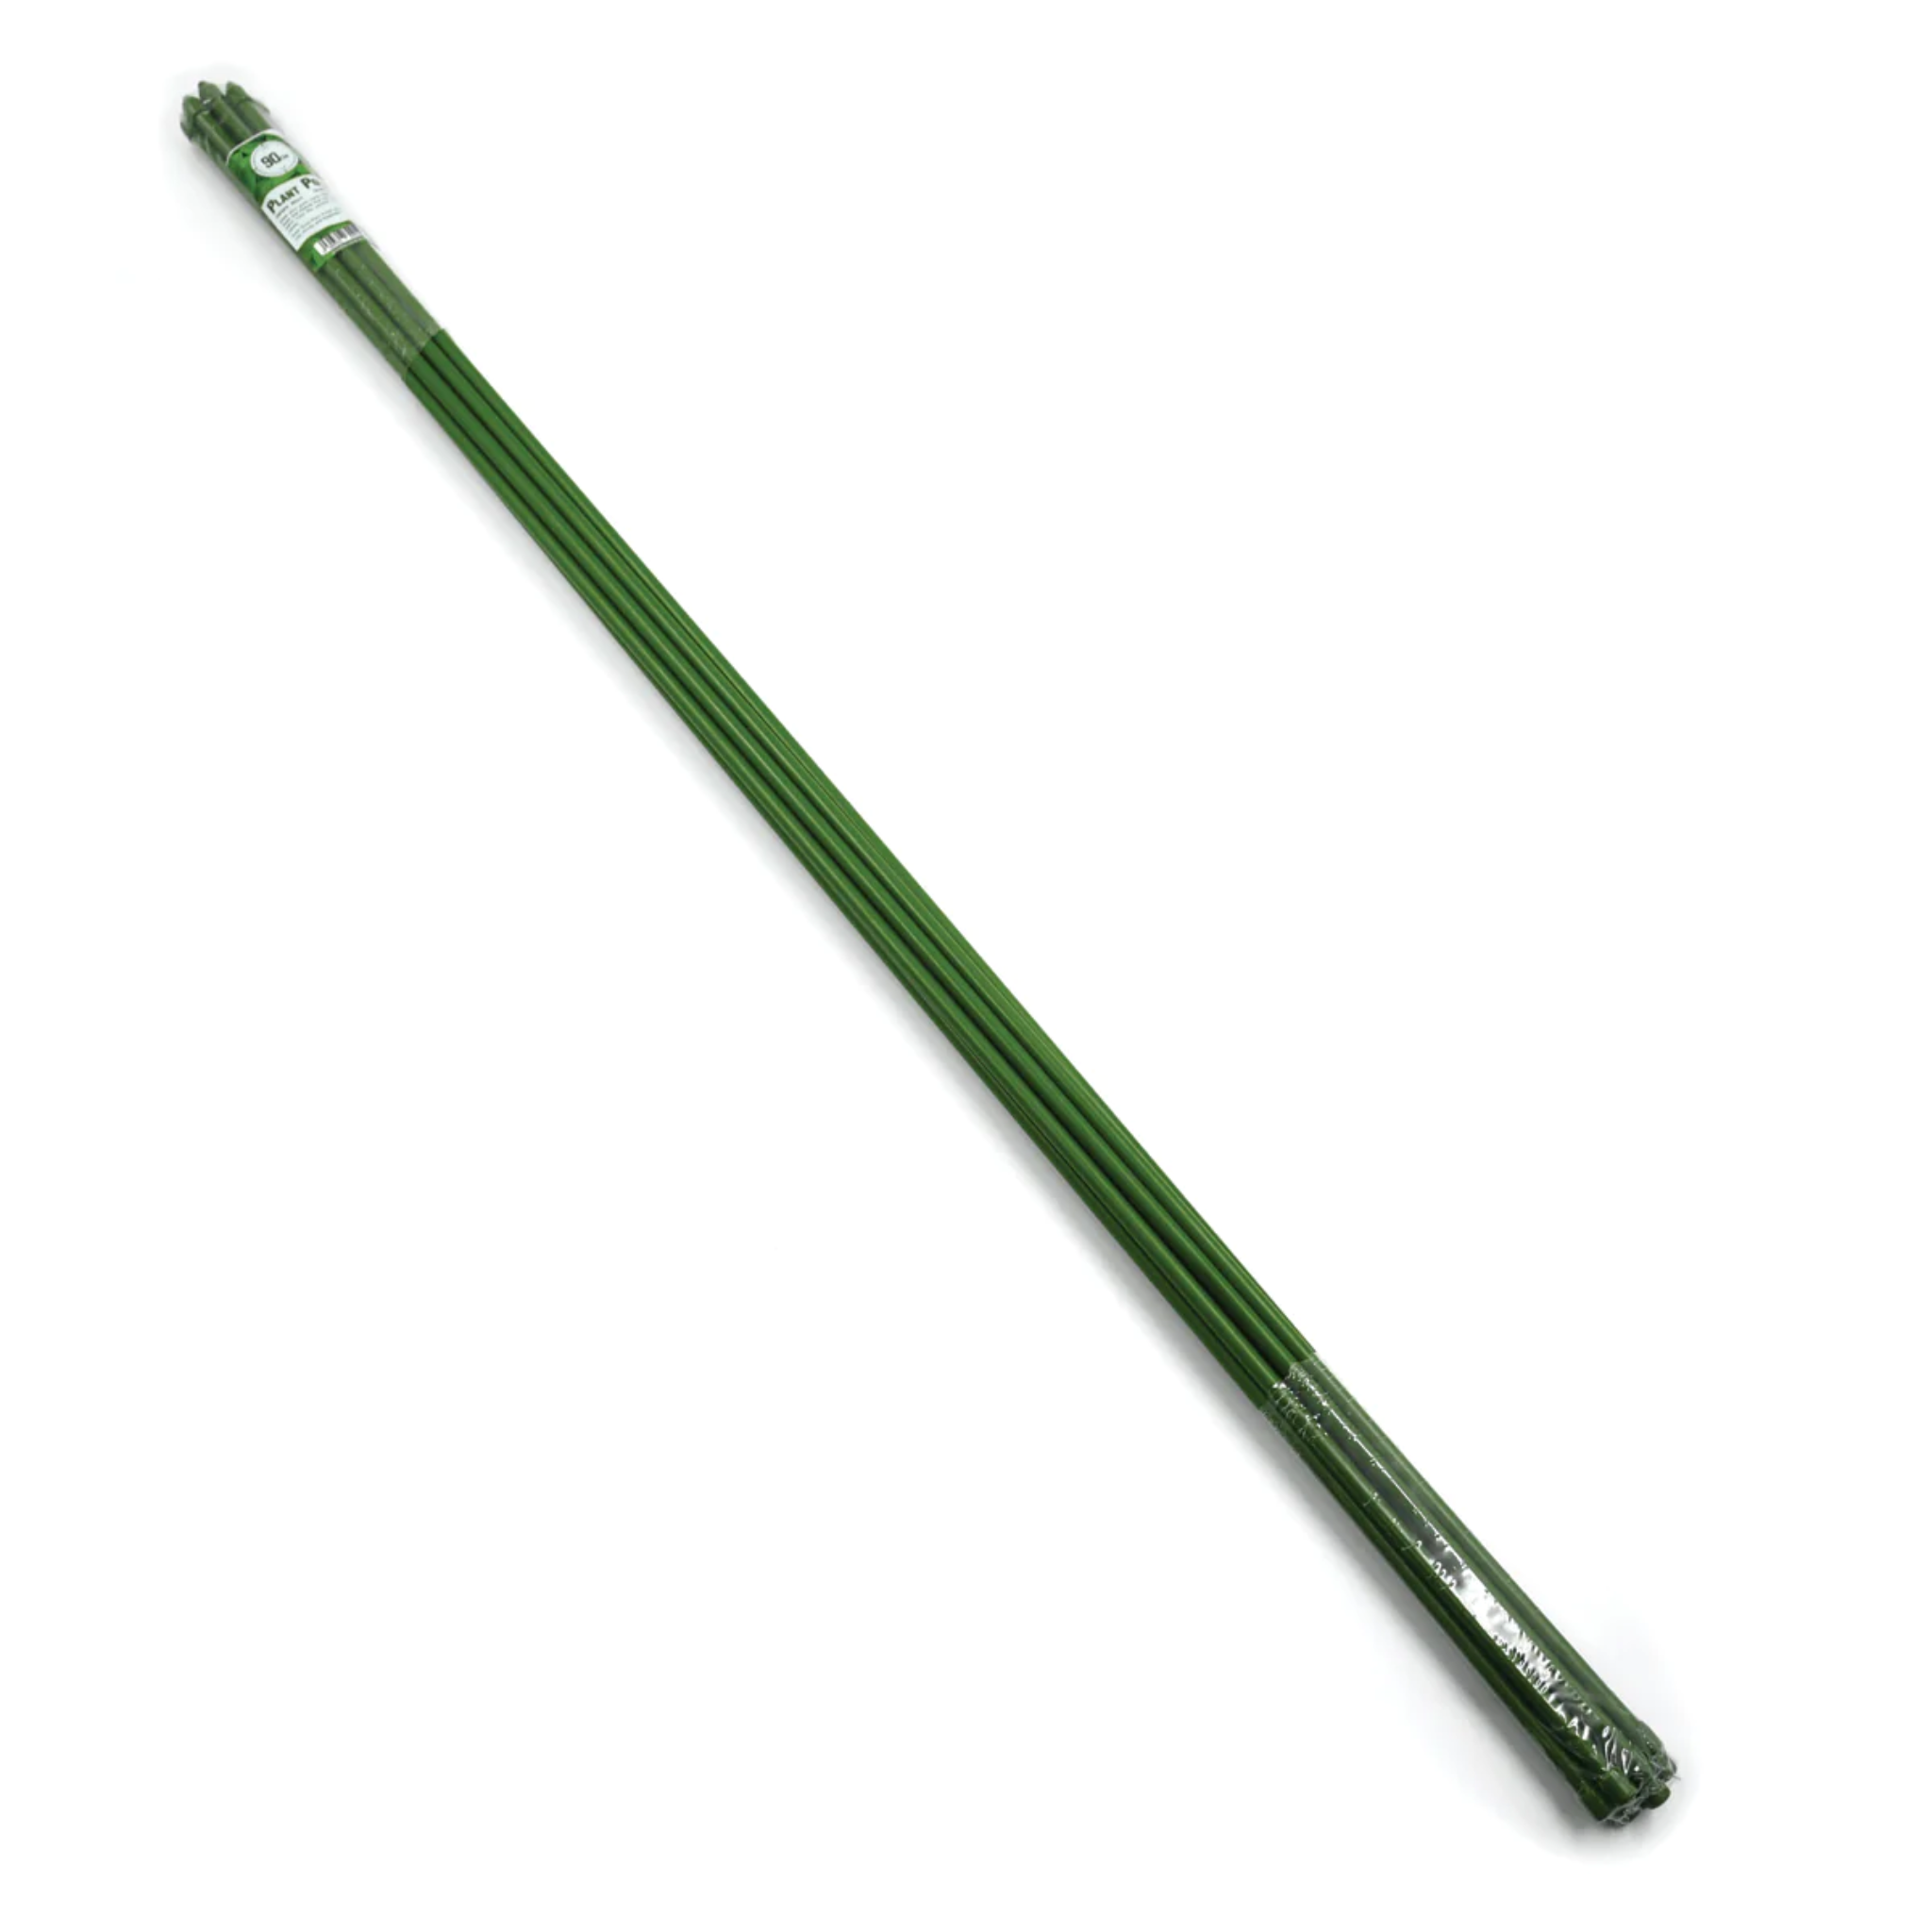 Plastic Coated Bamboo Stakes 5 Pack